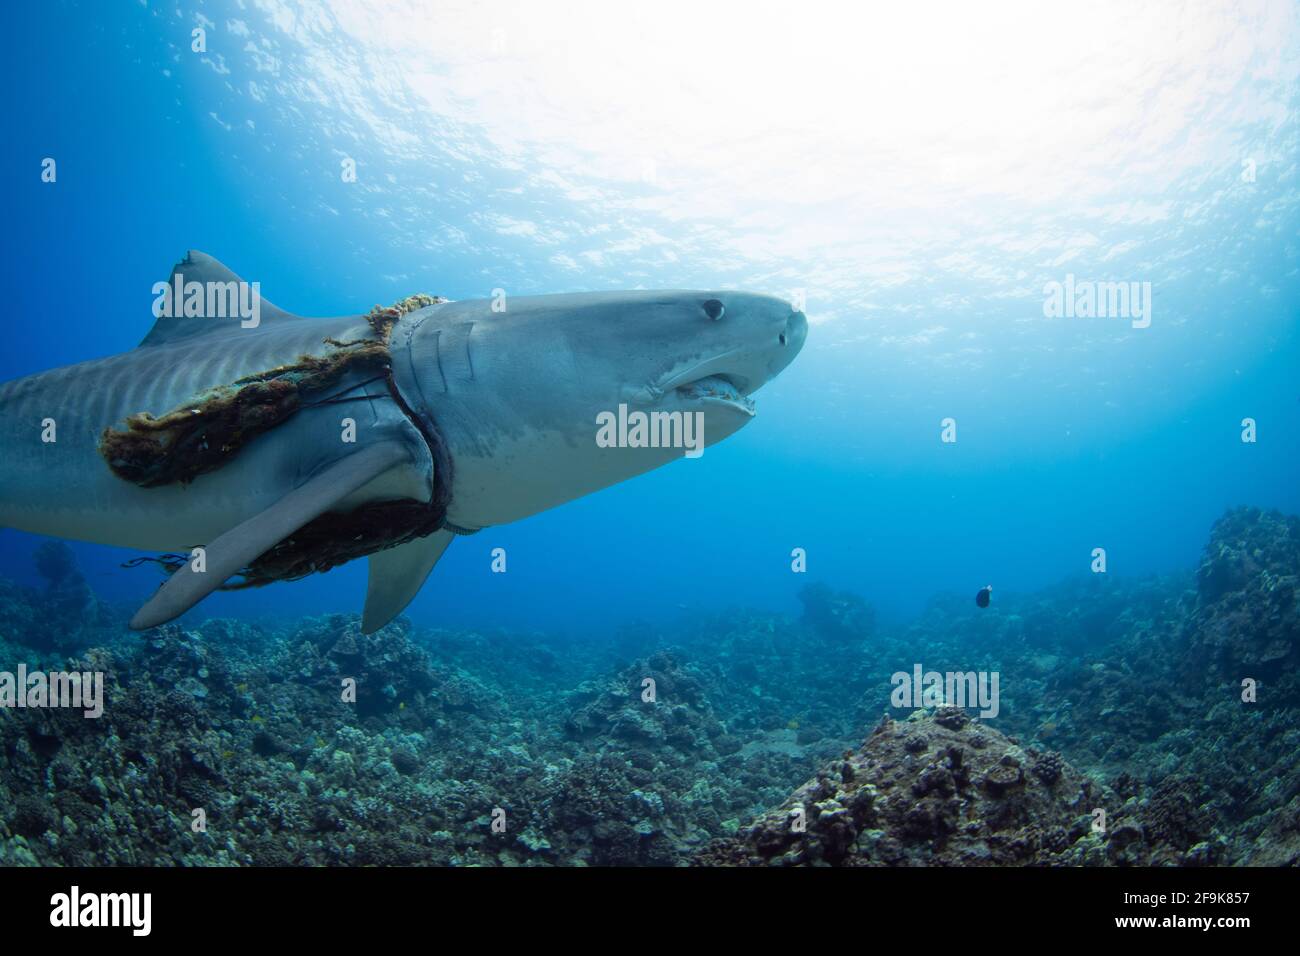 Jason documented the encounter to highlight the issues surrounding ocean pollution. HAWAII, USA: THIS SHARK with a NOOSE around its neck was spotted b Stock Photo